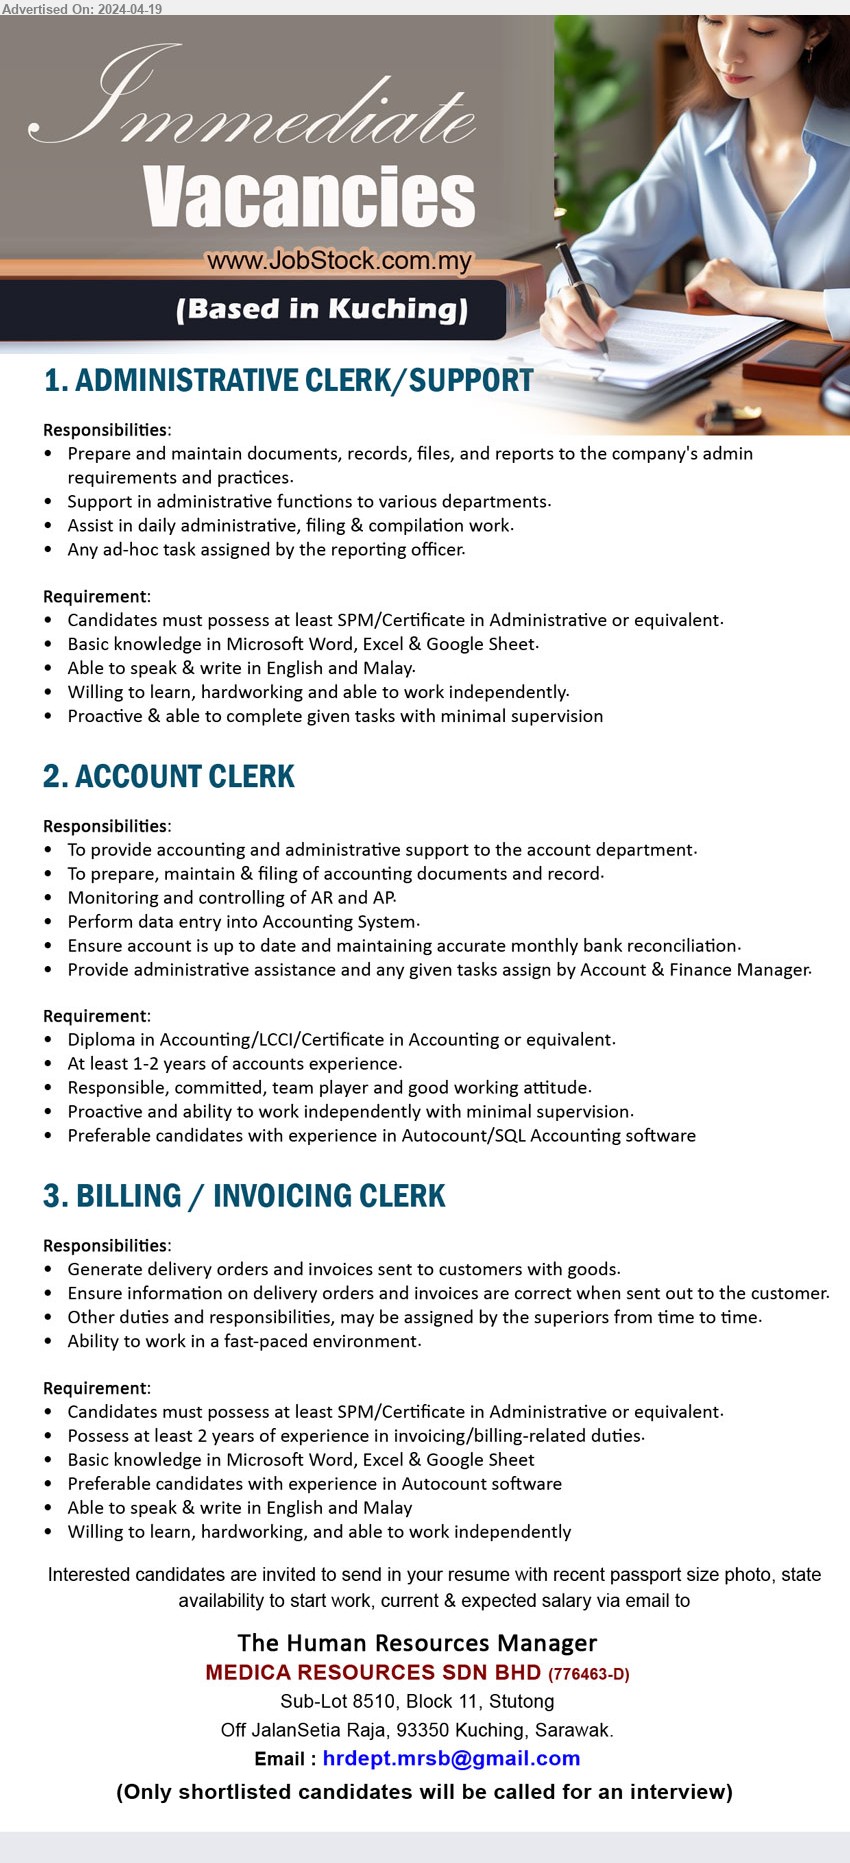 MEDICA RESOURCES SDN BHD - 1. ADMINISTRATIVE CLERK/SUPPORT  (Kuching), SPM/Certificate in Administrative or equivalent, Basic knowledge in Microsoft Word, Excel & Google Sheet.,...
2. ACCOUNT CLERK (Kuching), Diploma in Accounting/LCCI/Certificate in Accounting or equivalent, At least 1-2 yrs. exp.,...
3. BILLING / INVOICING CLERK (Kuching), SPM/Certificate in Administrative or equivalent, Possess at least 2 years of experience in invoicing/billing-related duties.,...
Email resume to ...